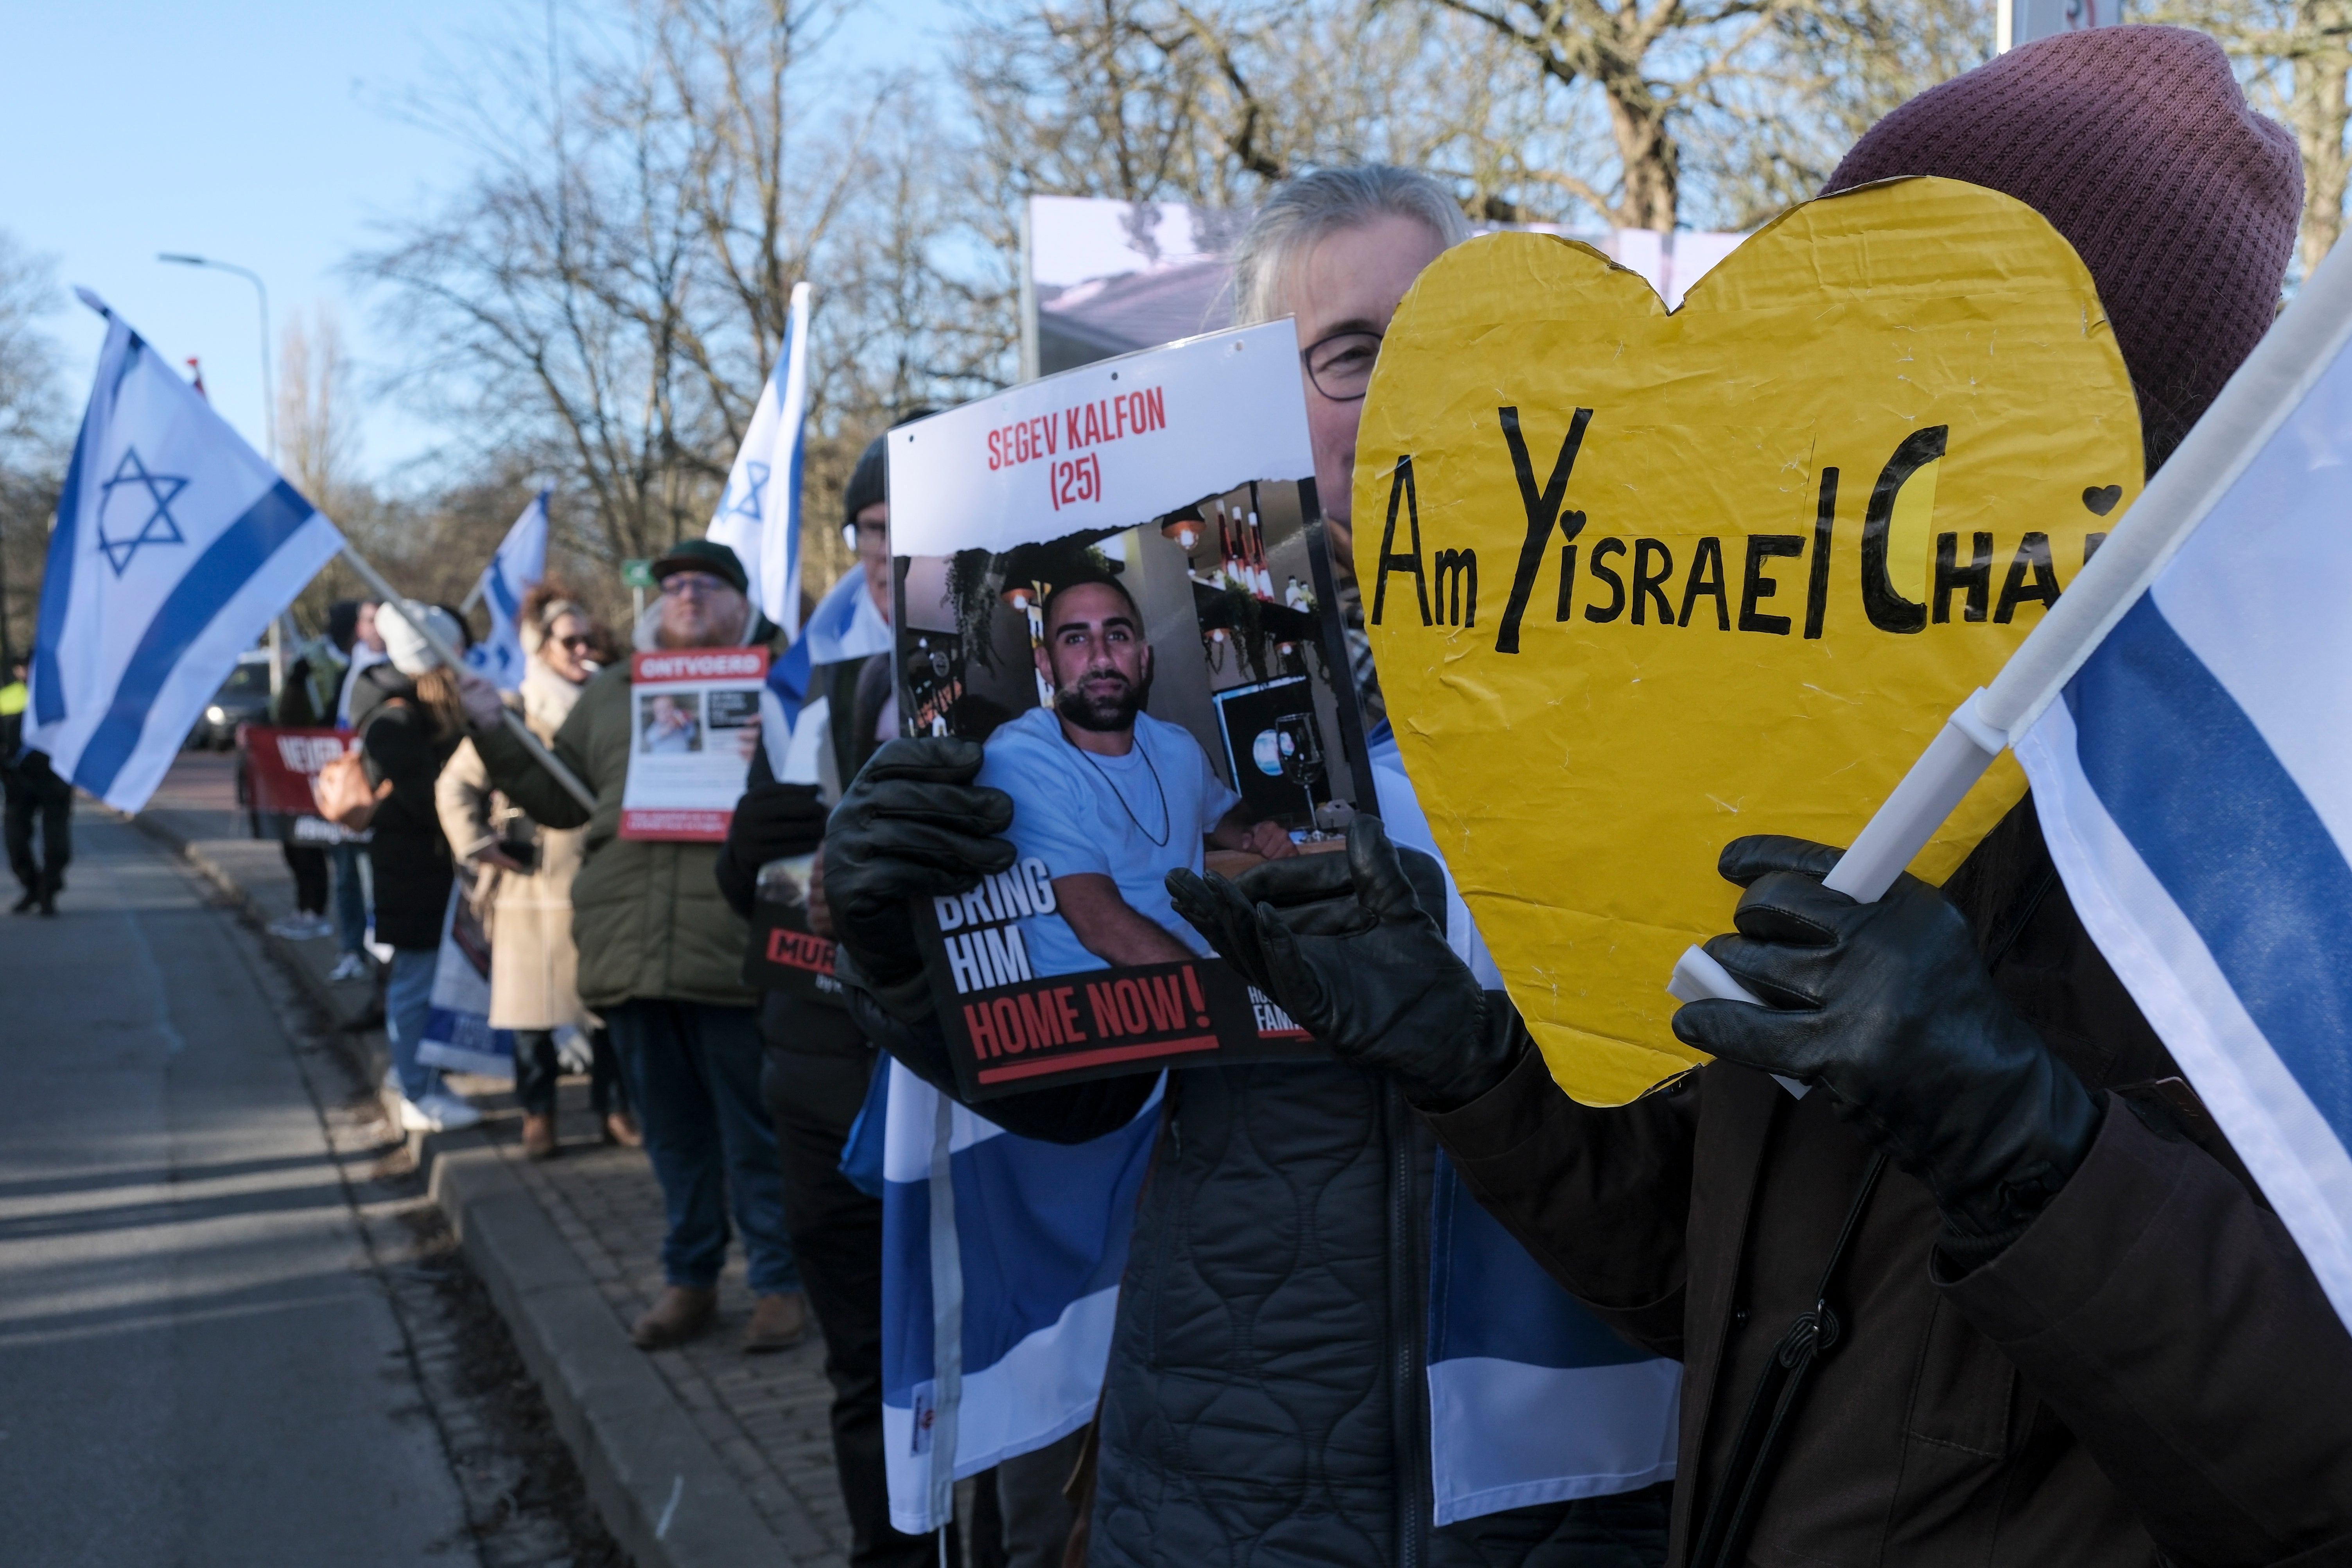 Pro-Israel activists gather near the International Court of Justice in The Hague